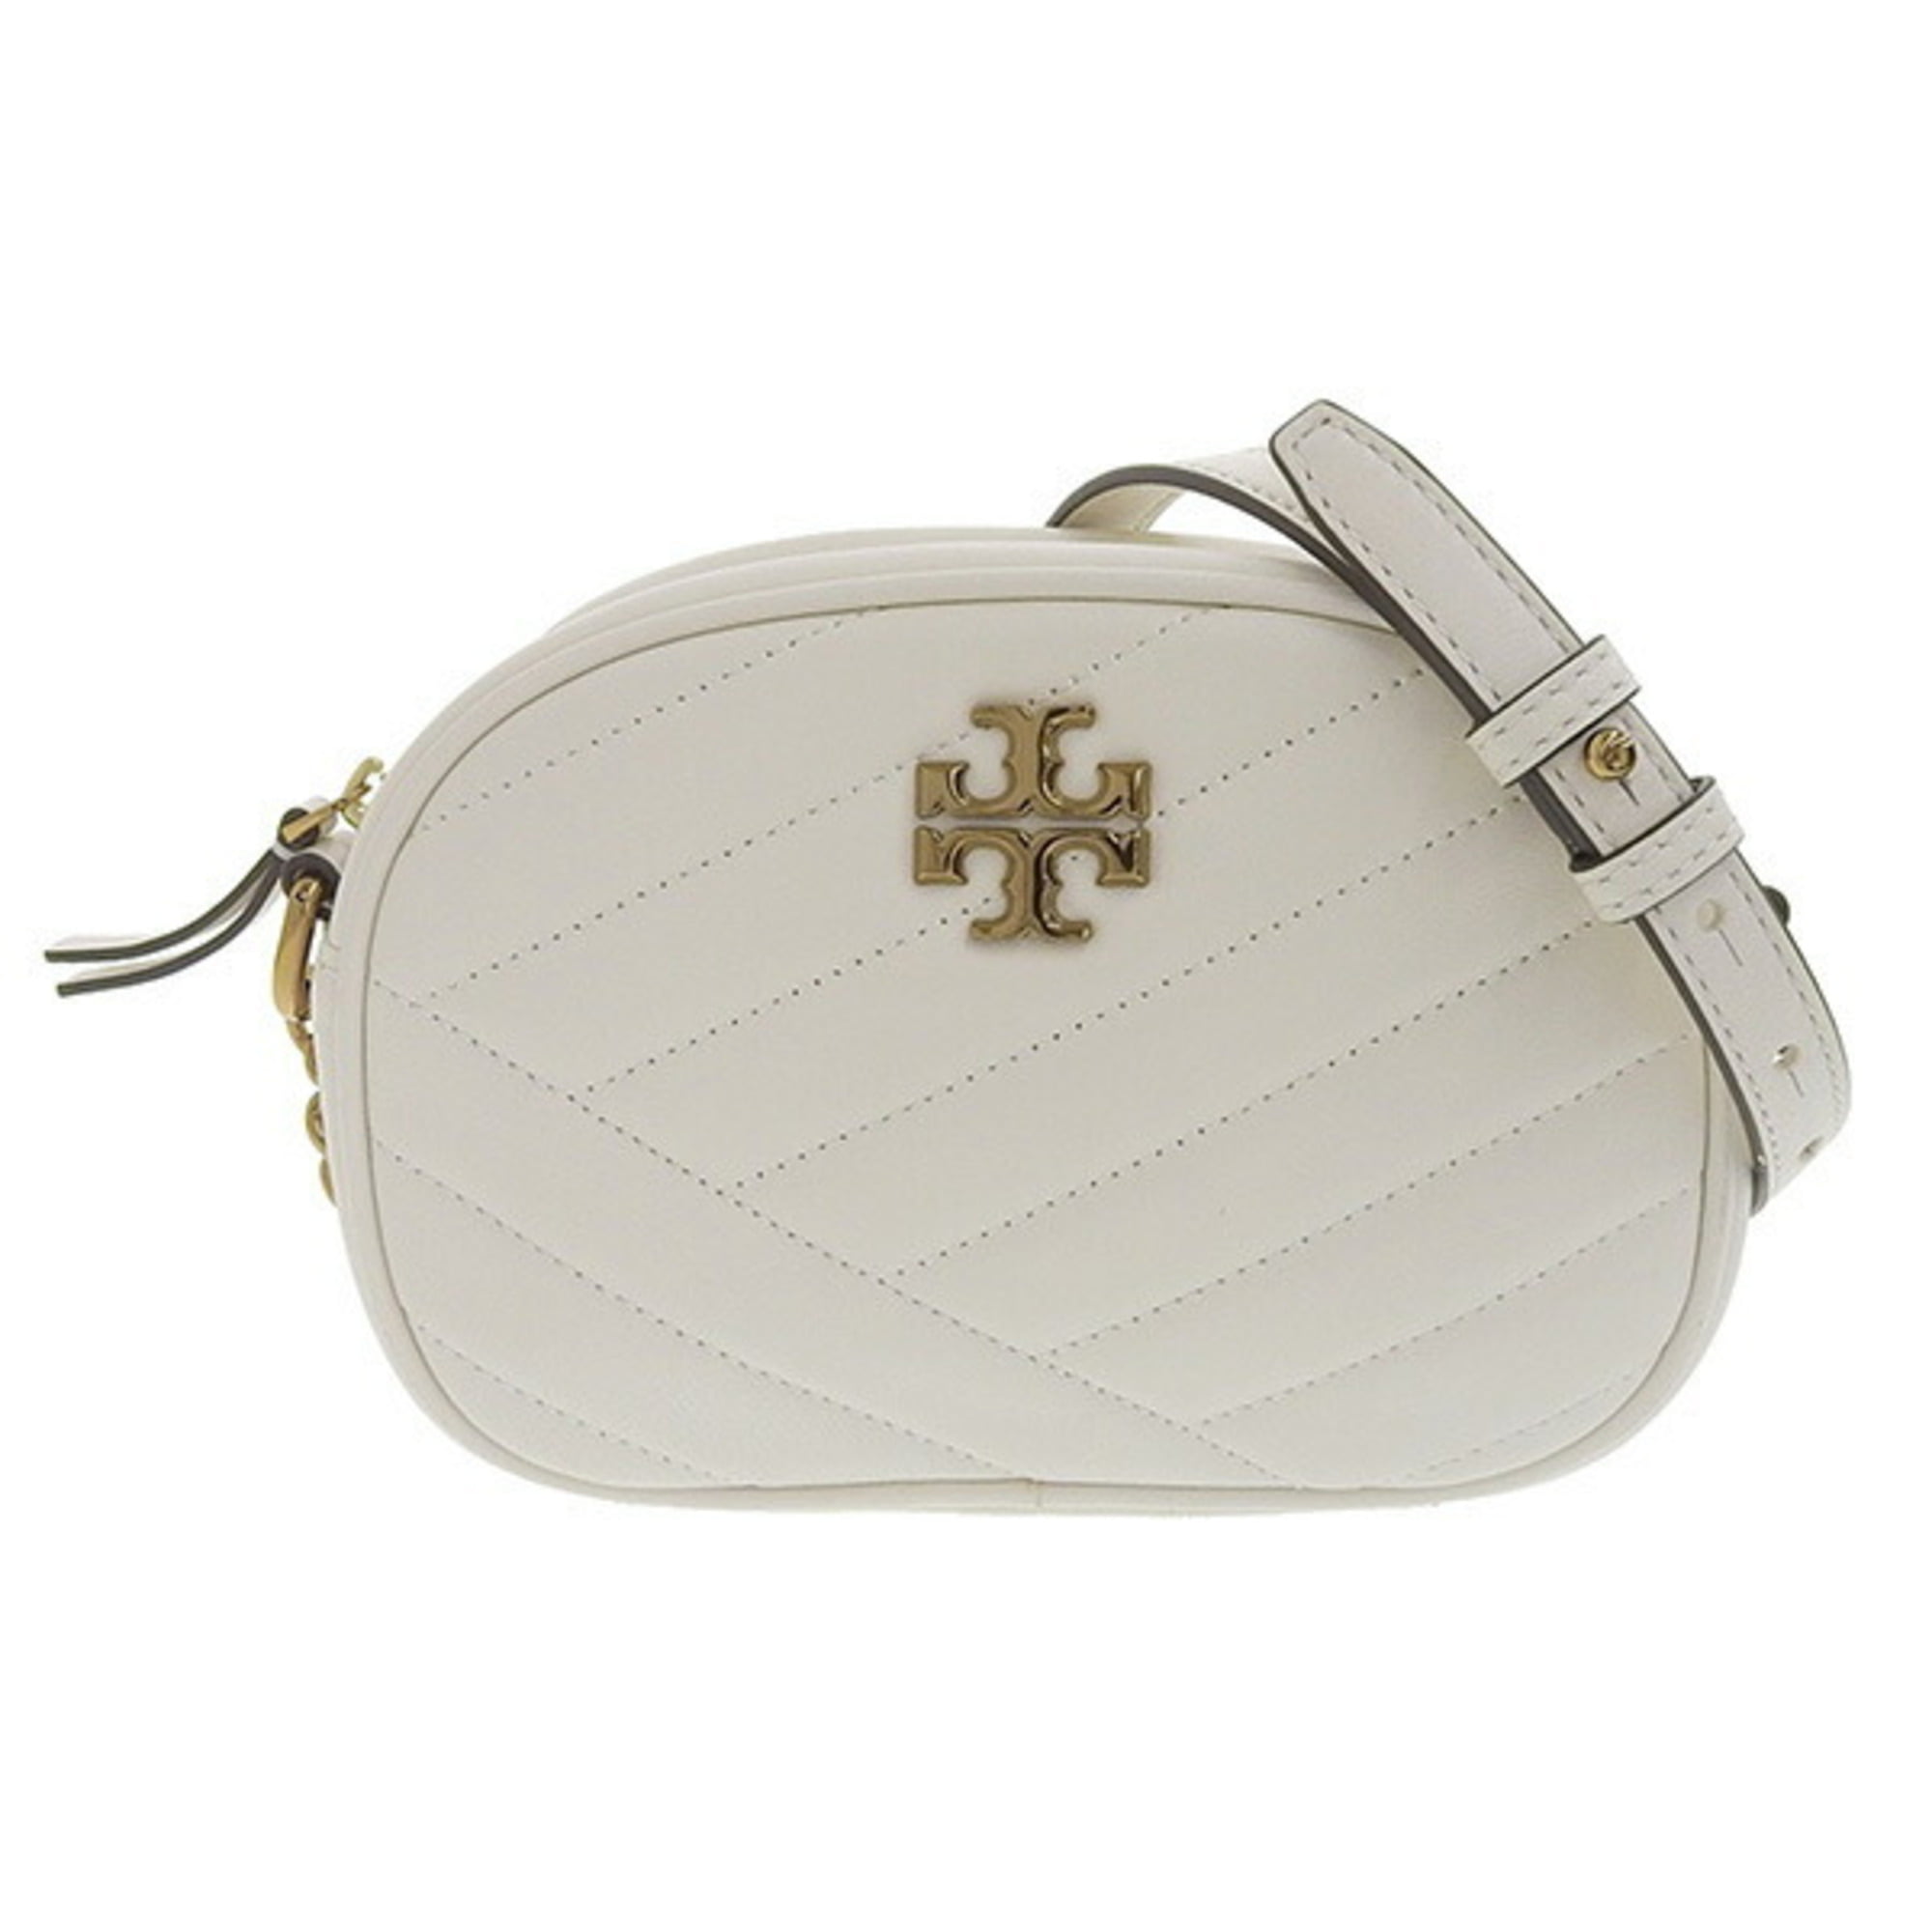 Authenticated Used TORY BURCH Tory Burch Leather Stitch Chain Shoulder Bag  White 